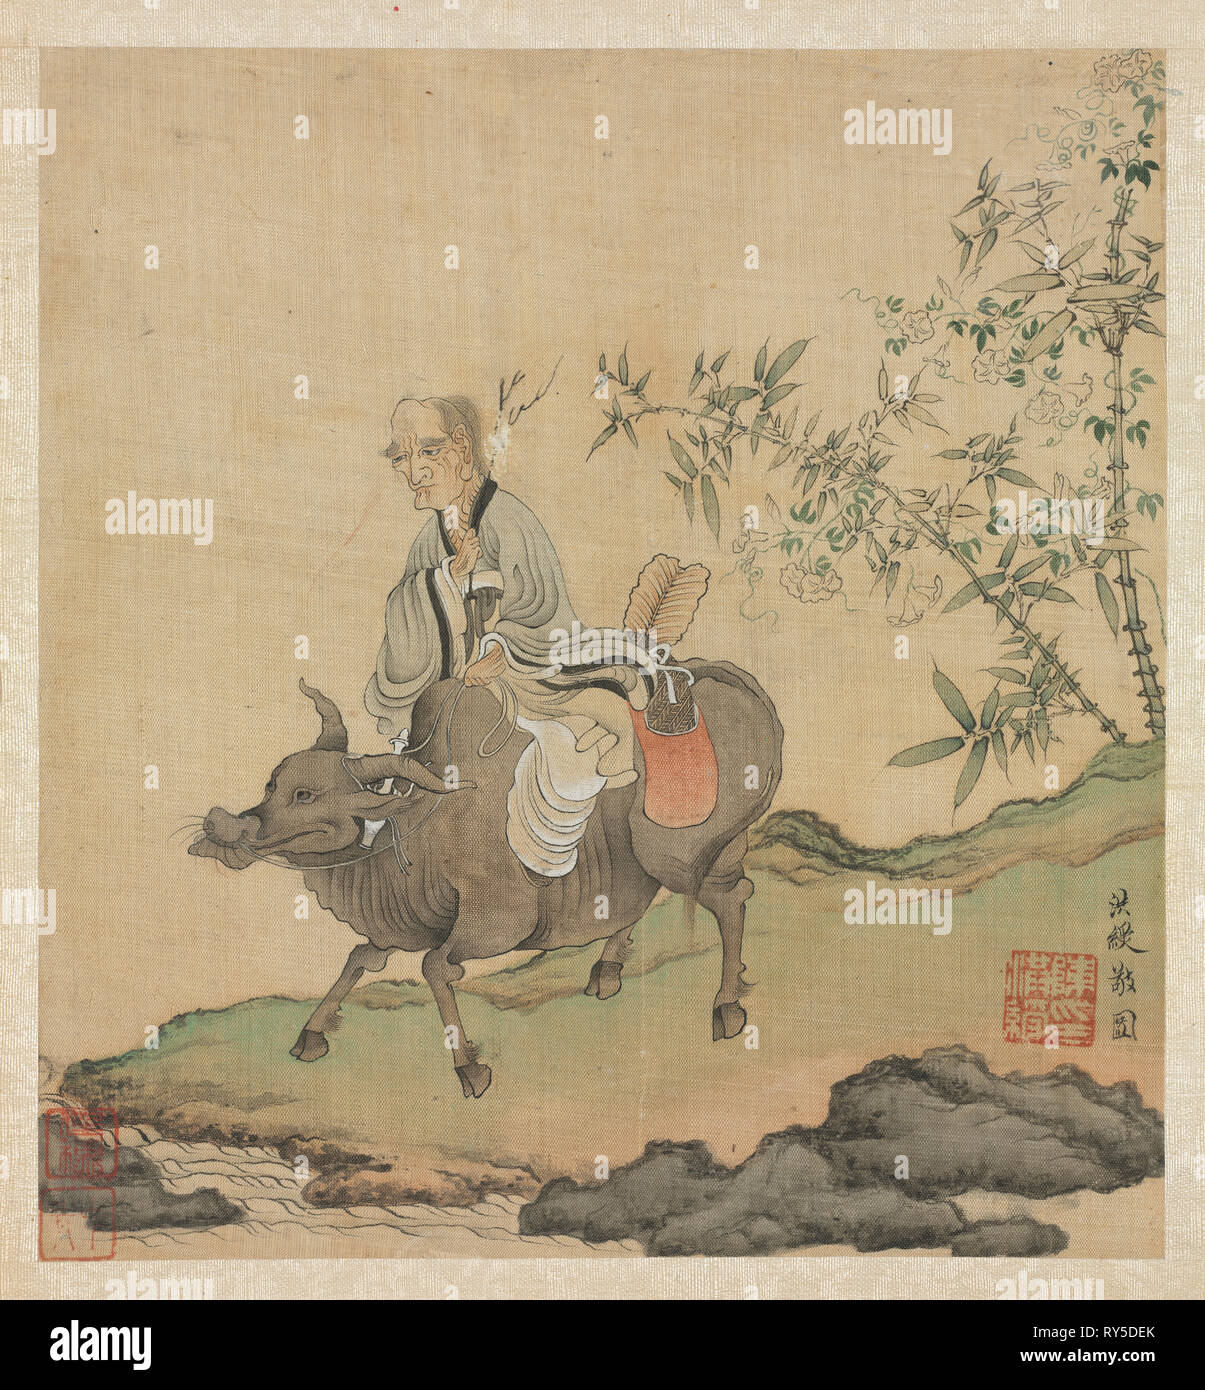 Paintings after Ancient Masters: Laozi Riding an Ox, 1598-1652. Chen Hongshou (Chinese, 1598/99-1652). Album leaf, ink and color on silk; overall: 30.2 x 26.7 cm (11 7/8 x 10 1/2 in Stock Photo